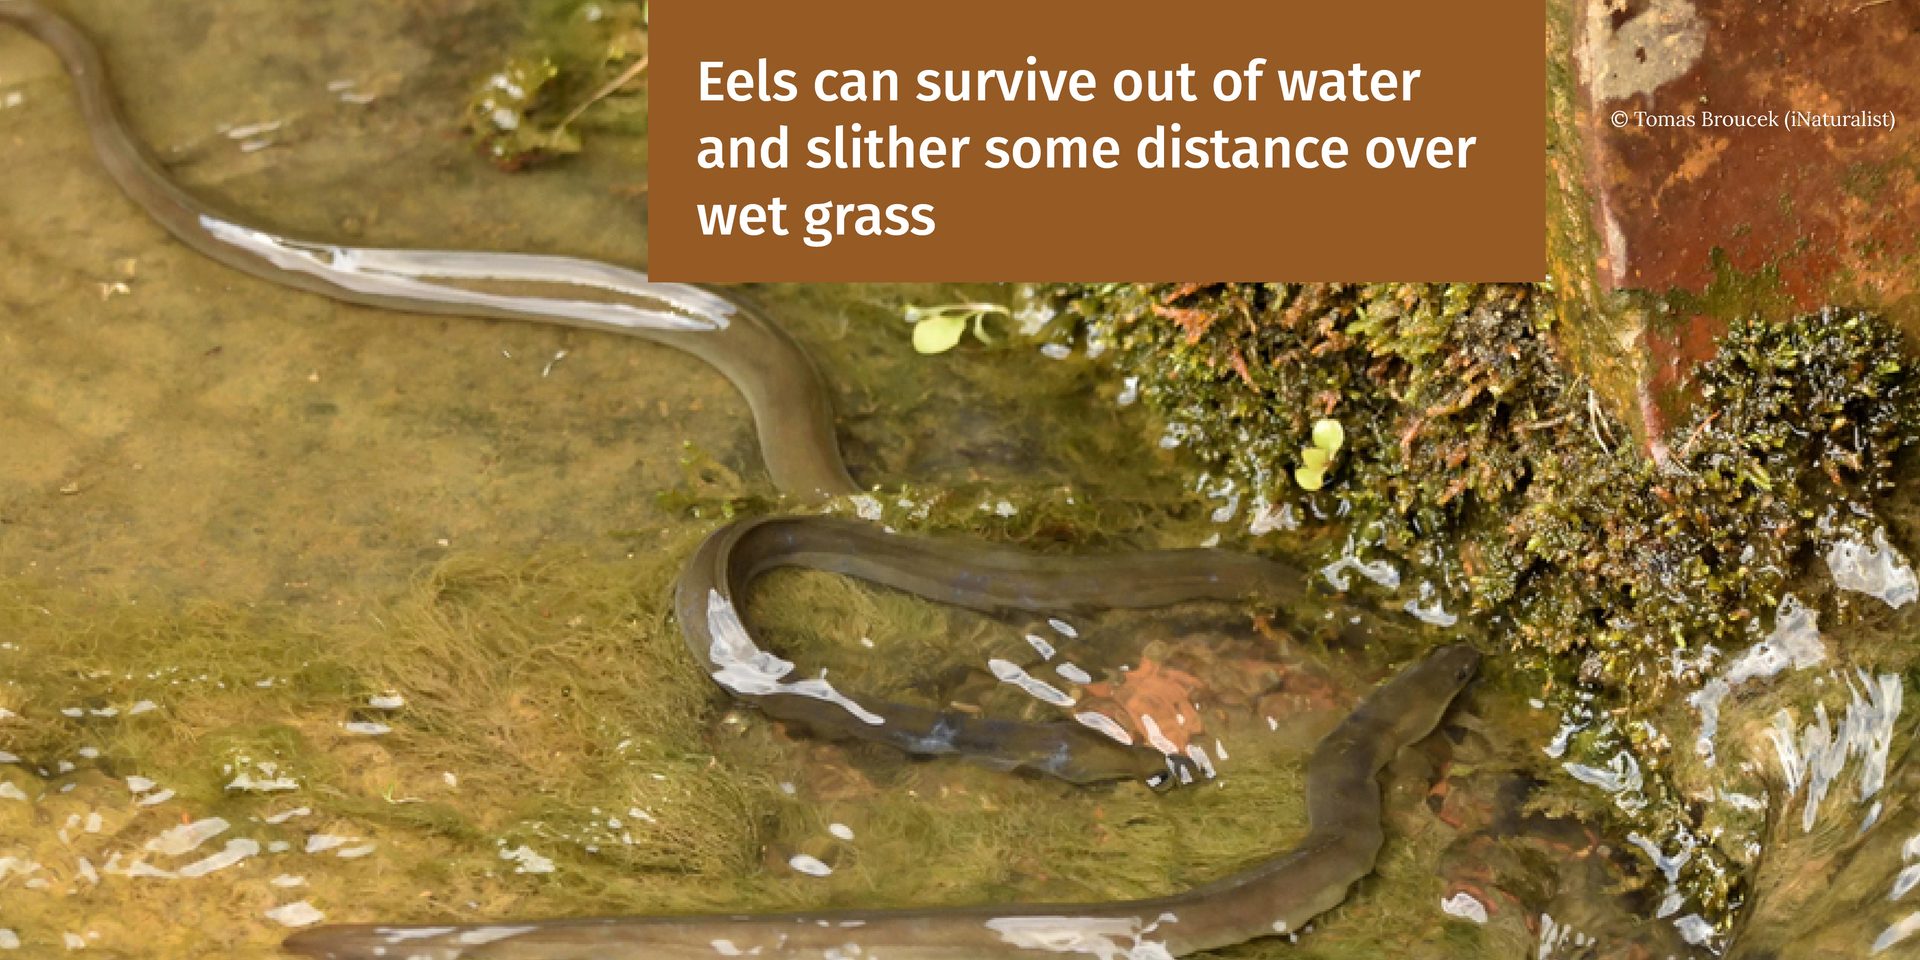 Adult eels can survive out of water and slither some distance over wet grass